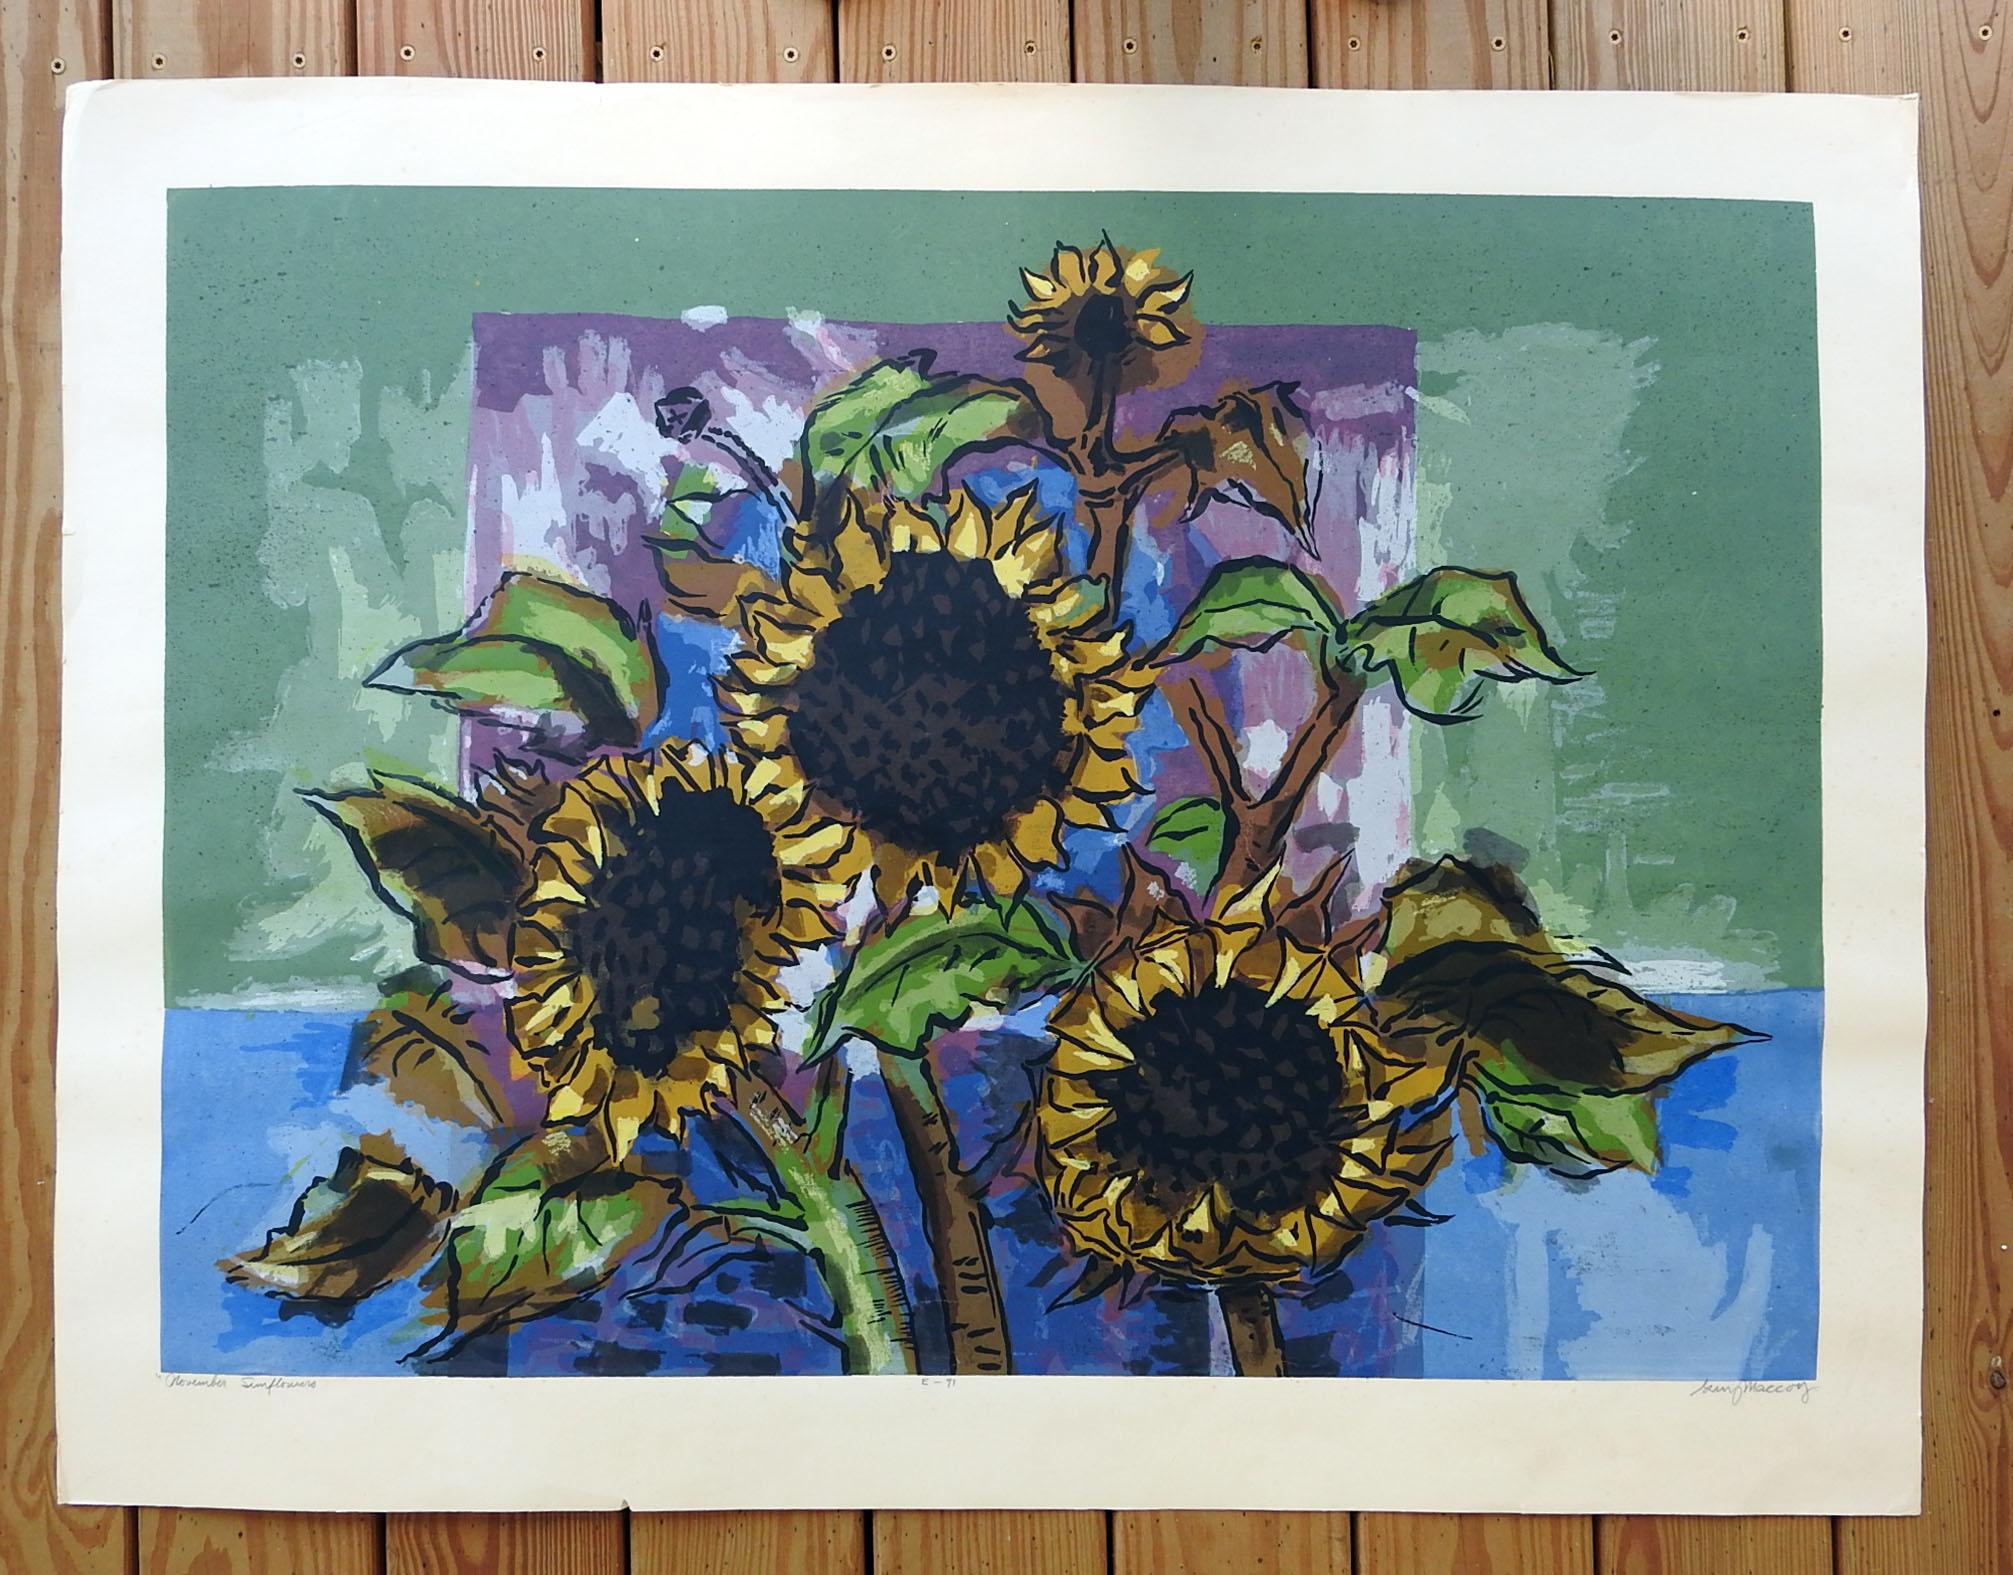 Large serigraph on paper circa 1960s by Guy Crittington Maccoy (b. 1904-1981) American. Signed, titled November Sunflowers in pencil along lower margin. Known as The Father of The Serigraph. his serigraphs were hand stenciled on screen using a